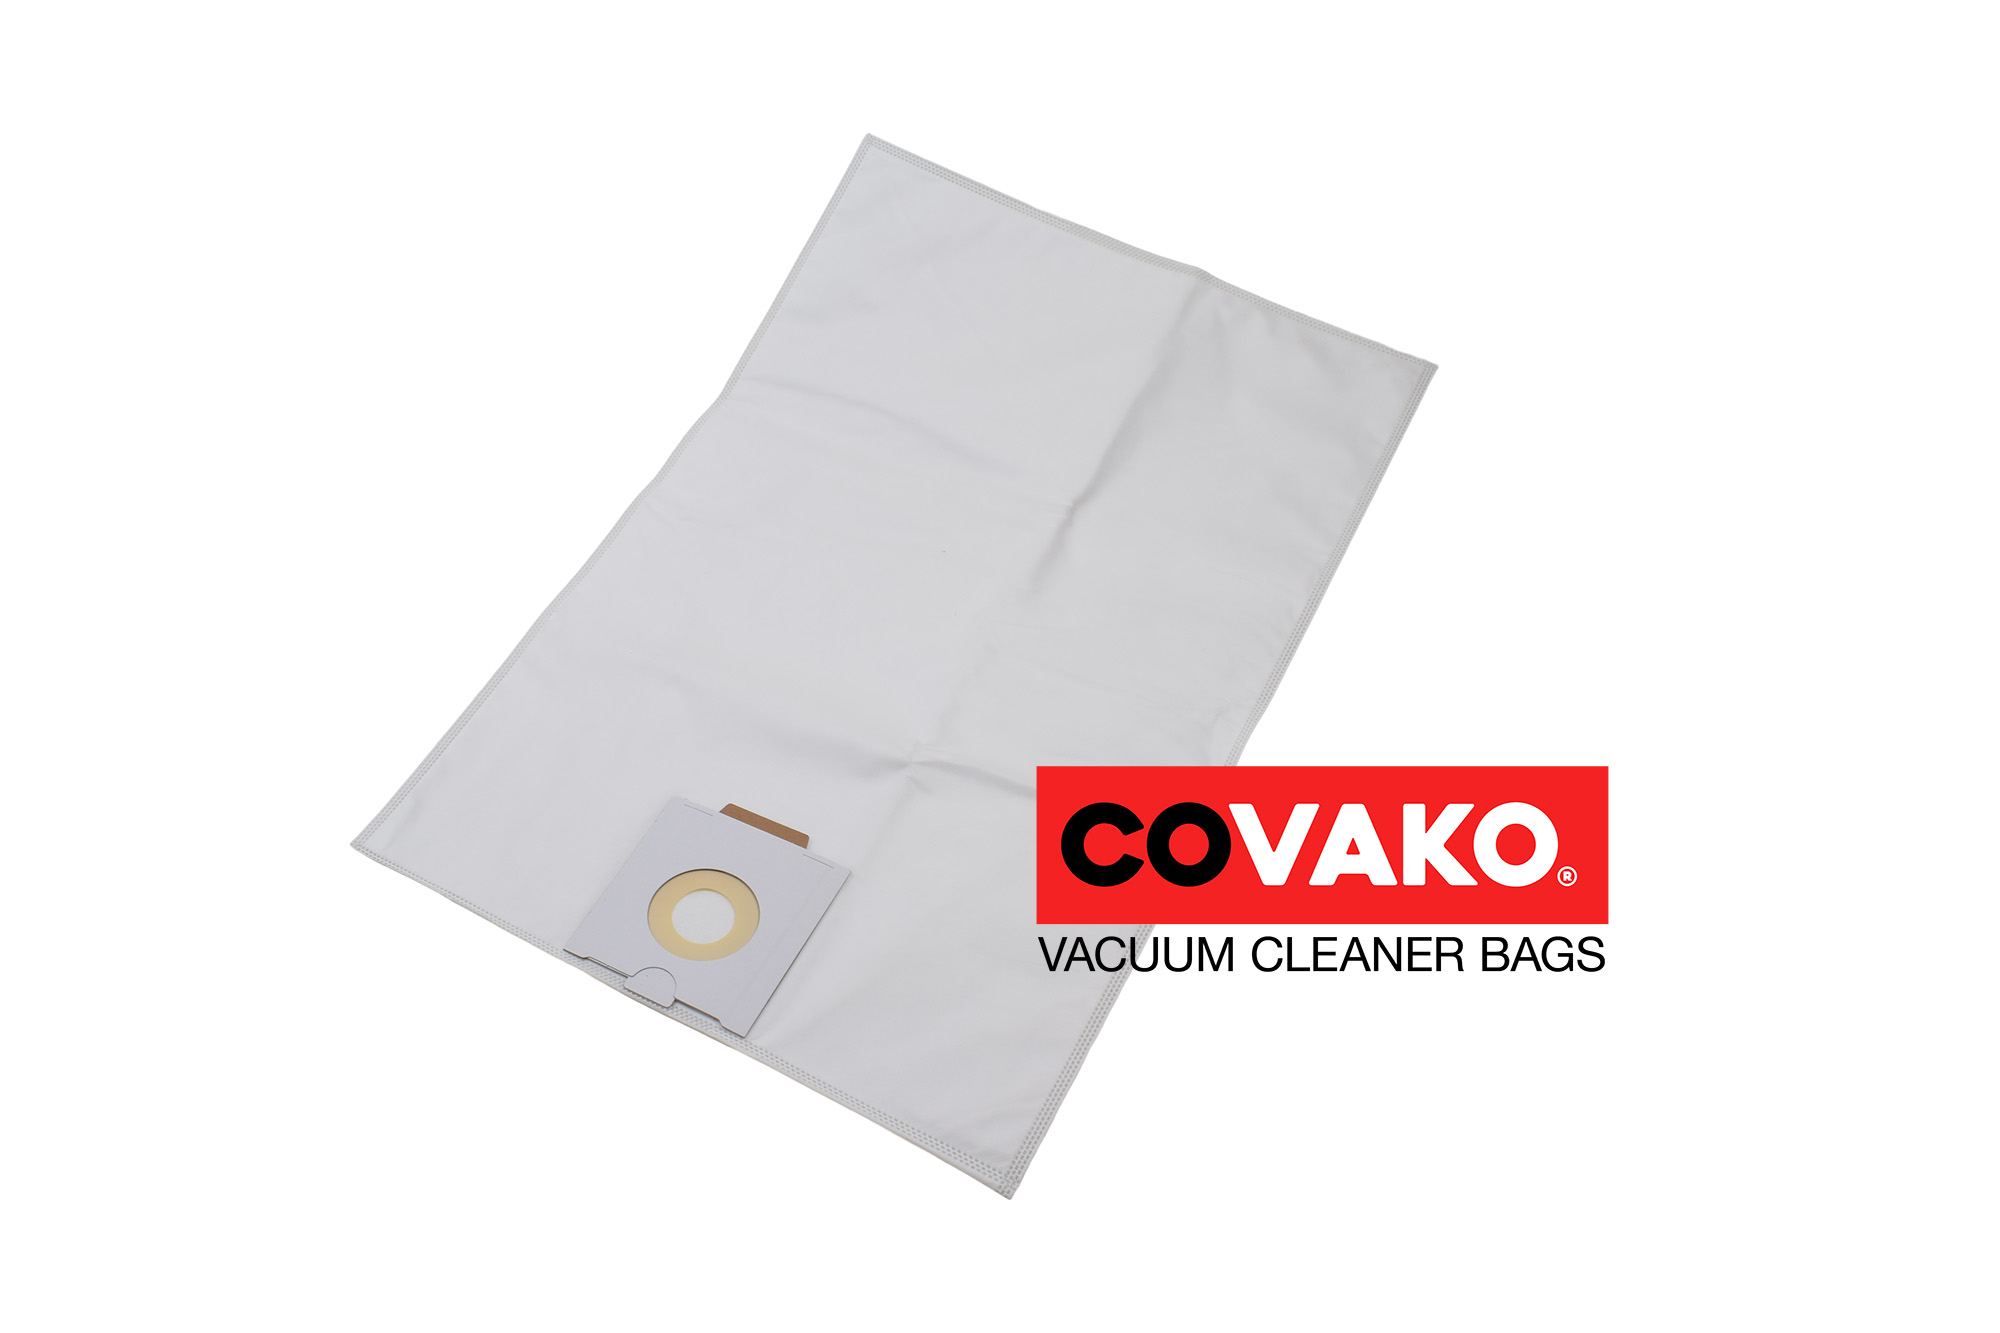 Protool VCP 260 / Synthesis - Protool vacuum cleaner bags